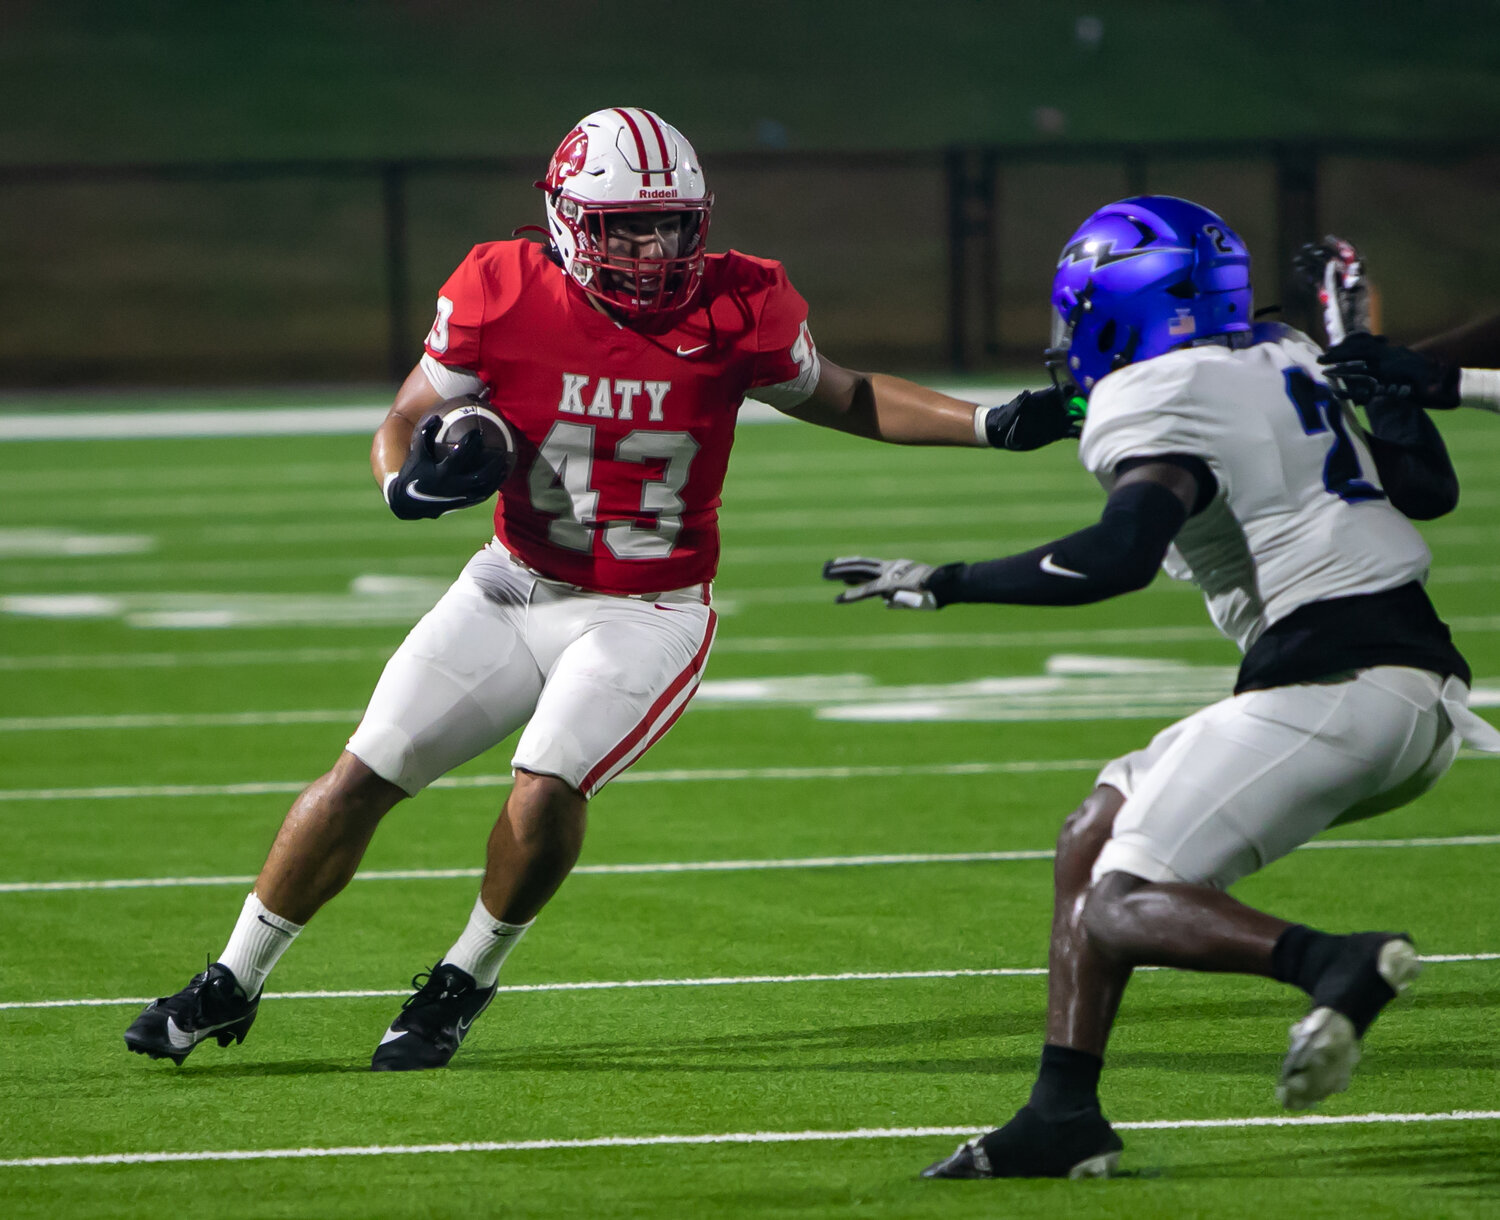 Luis Trujillo cuts upfield after making a catch during Saturday's game between Katy and Clear Springs at Rhodes Stadium.